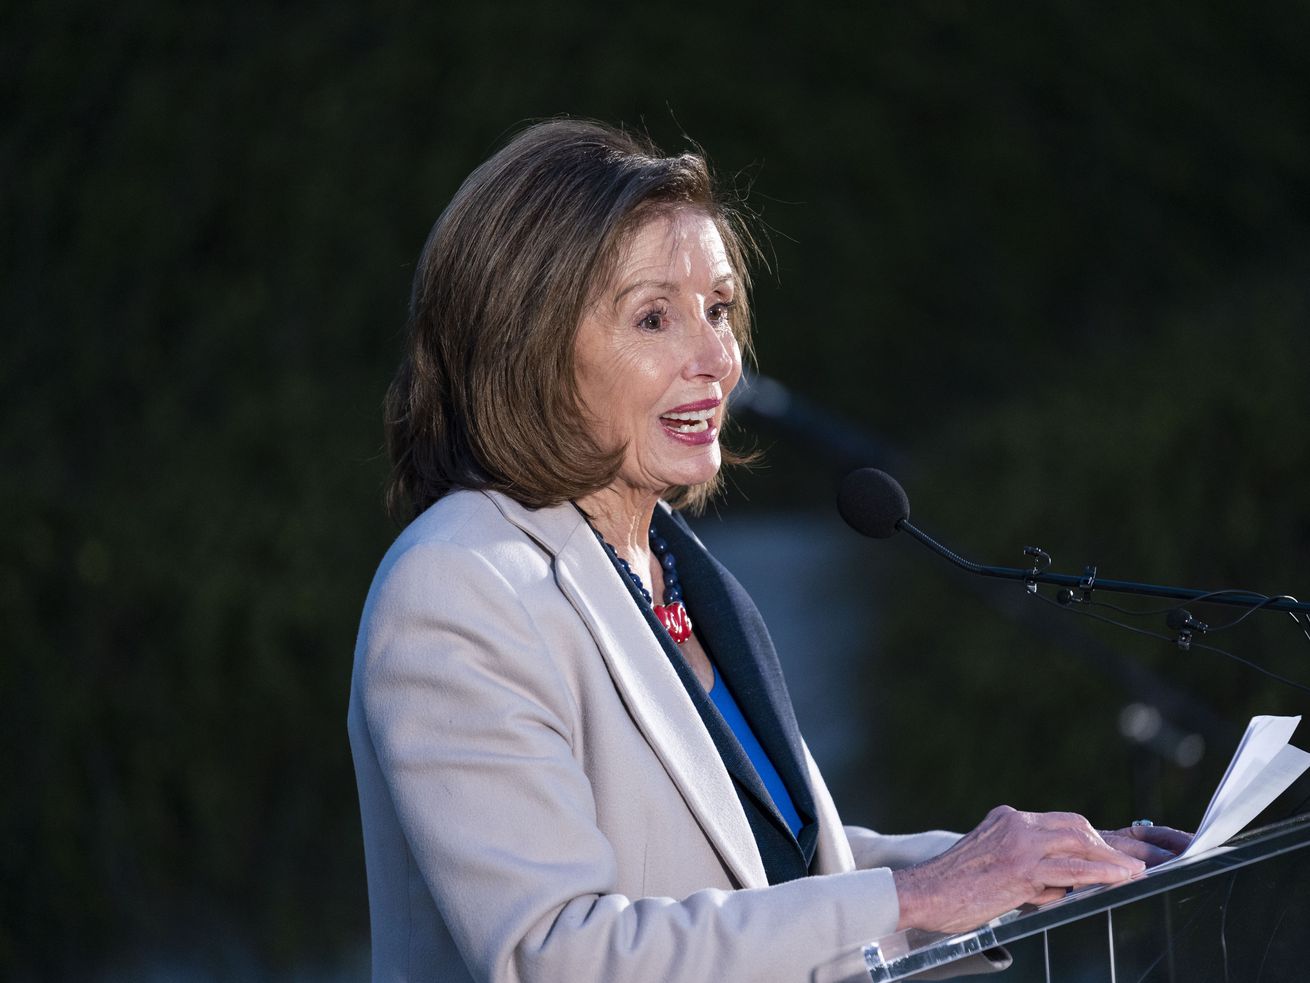 Pelosi, in a pale blue suit, is seen in profile against a dark background, speaking into a microphone.